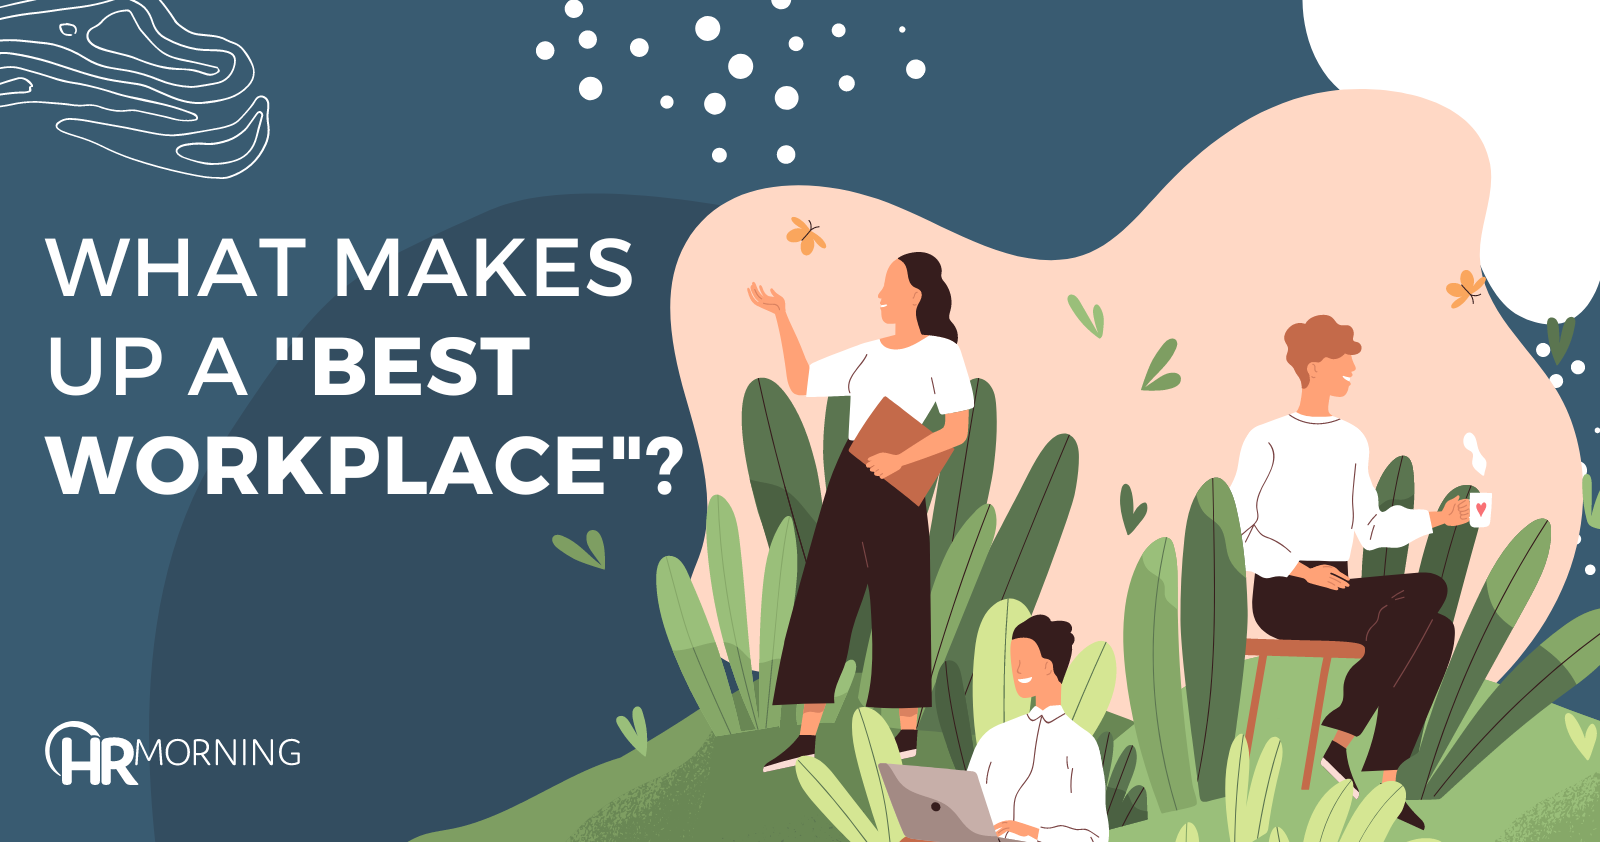 What makes up a "Best Workplace"?